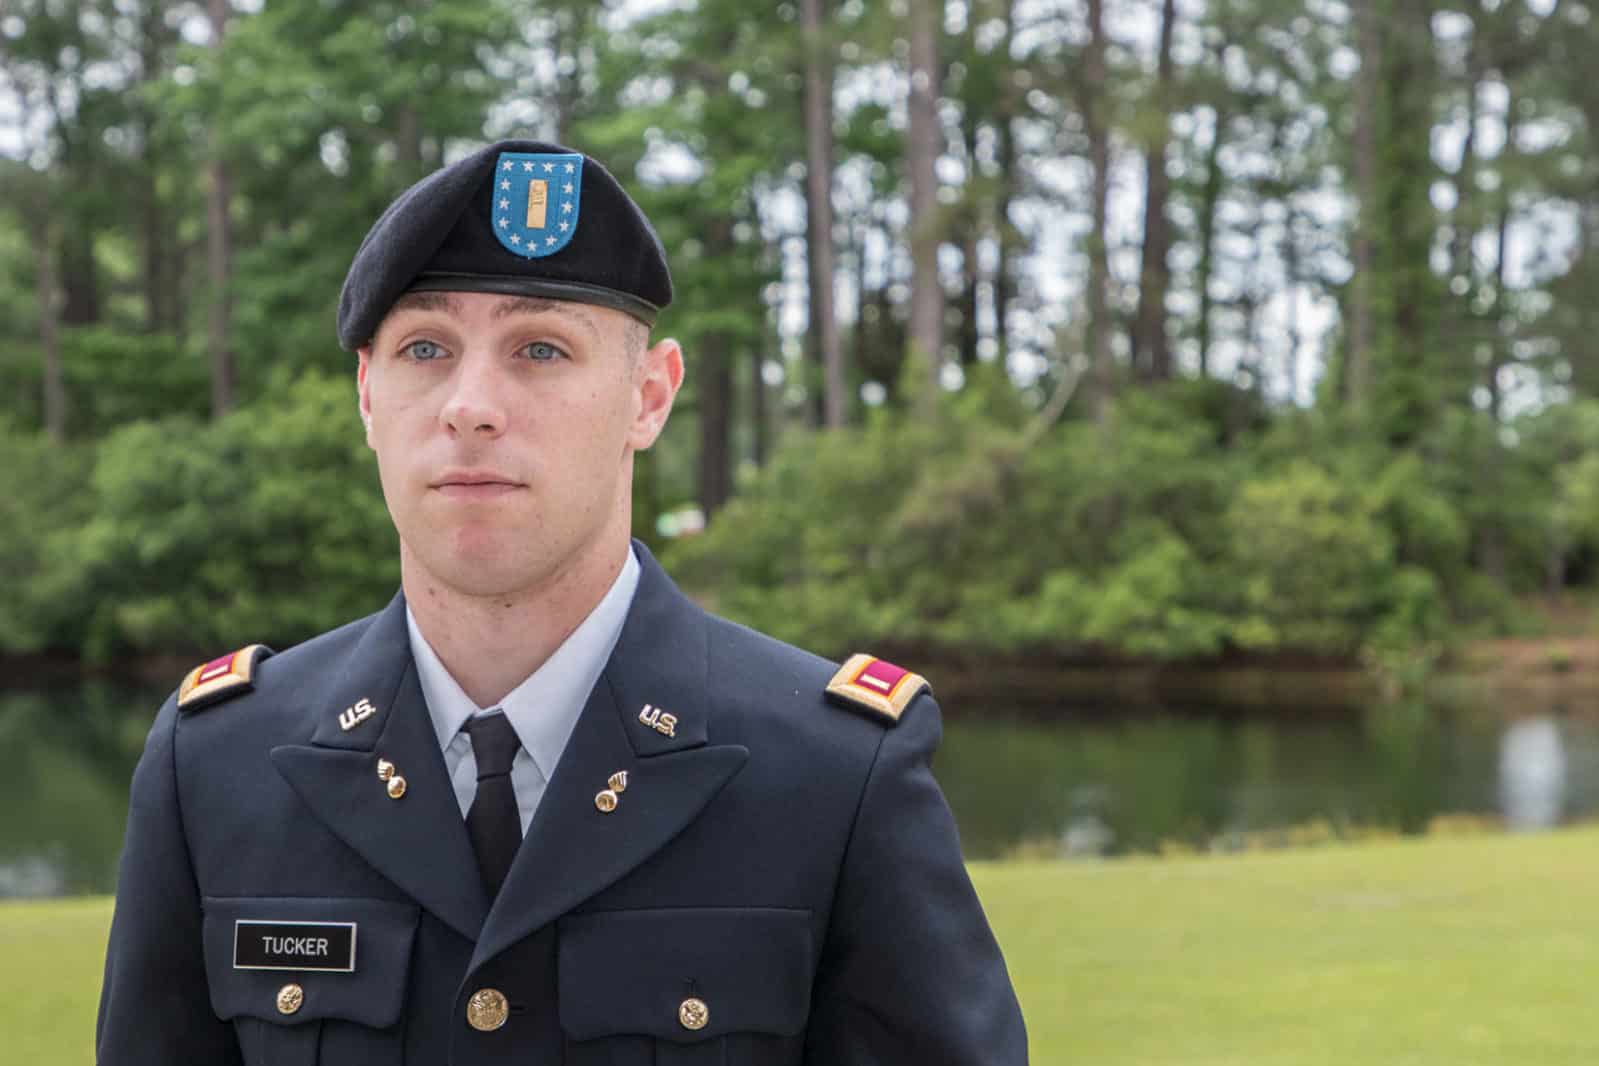 Mission accomplished: Grad goes from FMU to U.S. Army officer